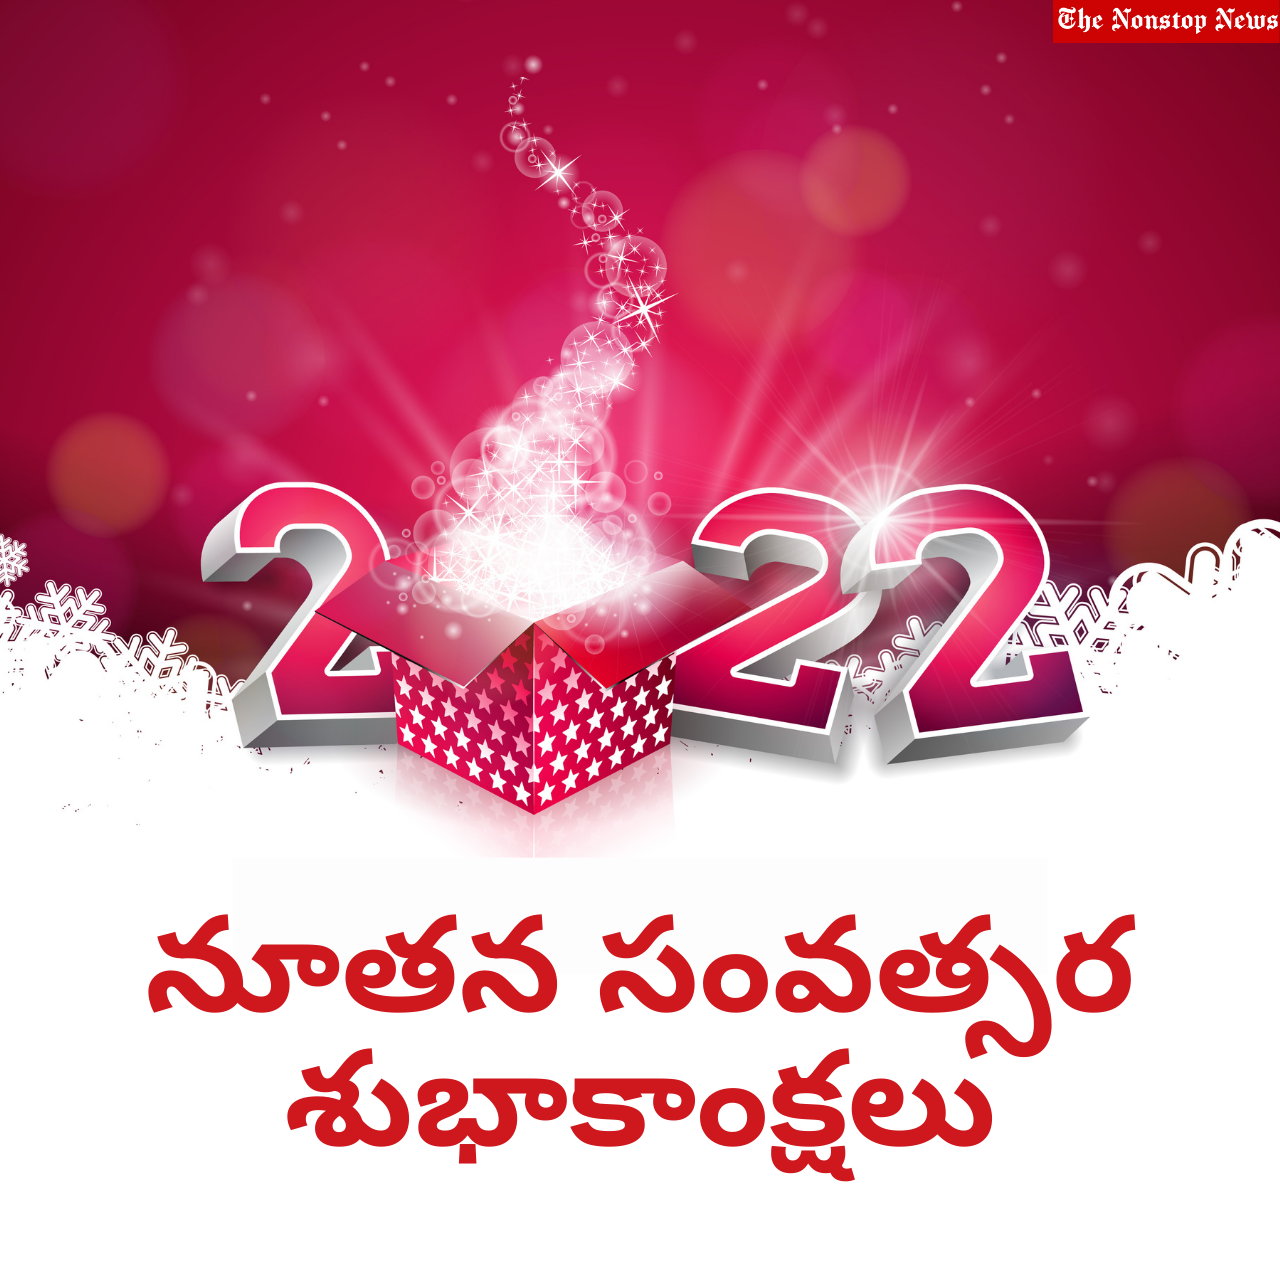 Happy New Year 2022: Telugu Greetings, Wishes, Quotes, HD Images, Messages, Phrases, and Posters to share